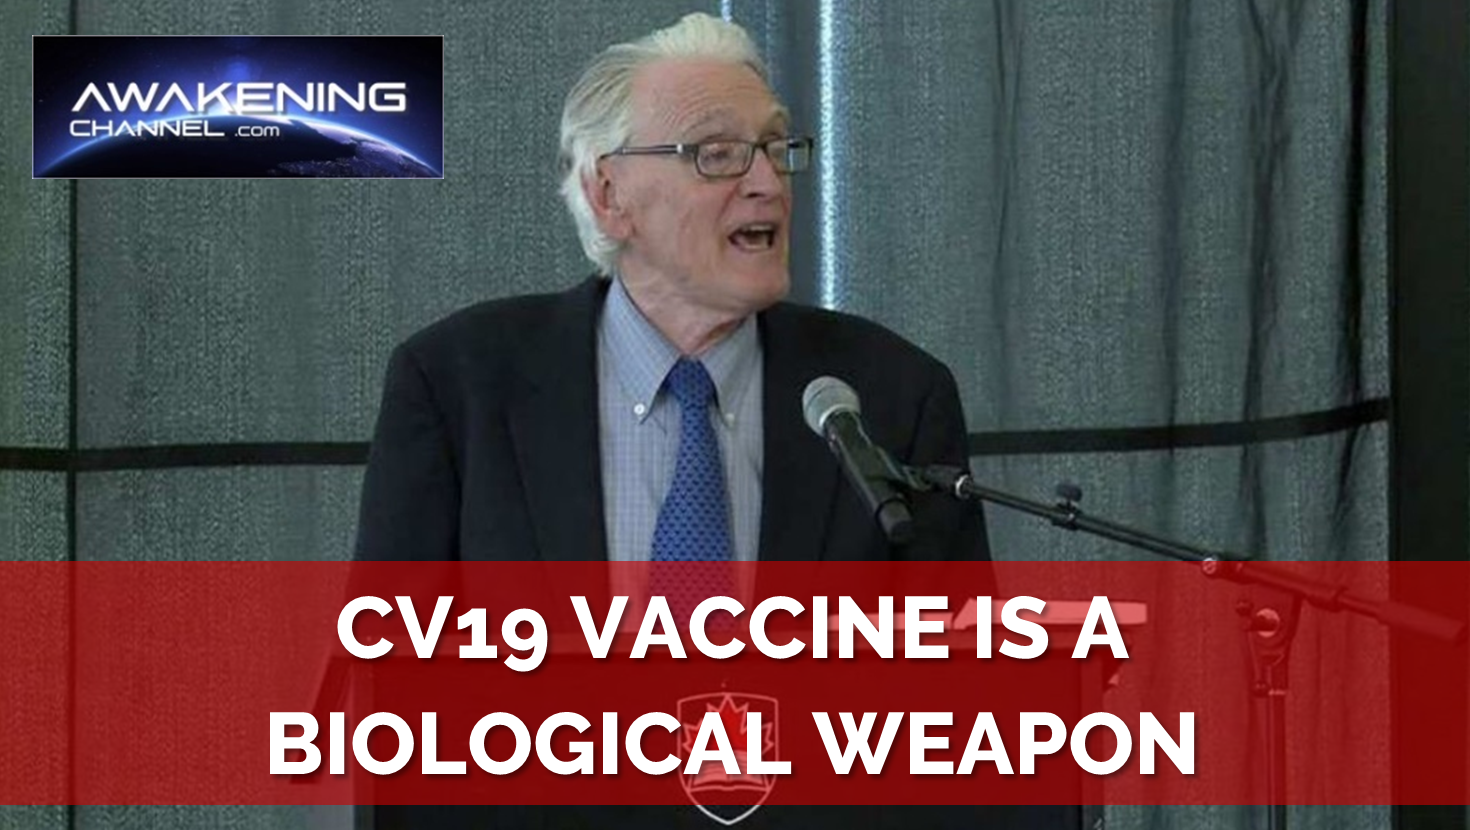 Professor Dr Boyle, CVI9 vaccines are biological weapons of the globalist to reduce the population